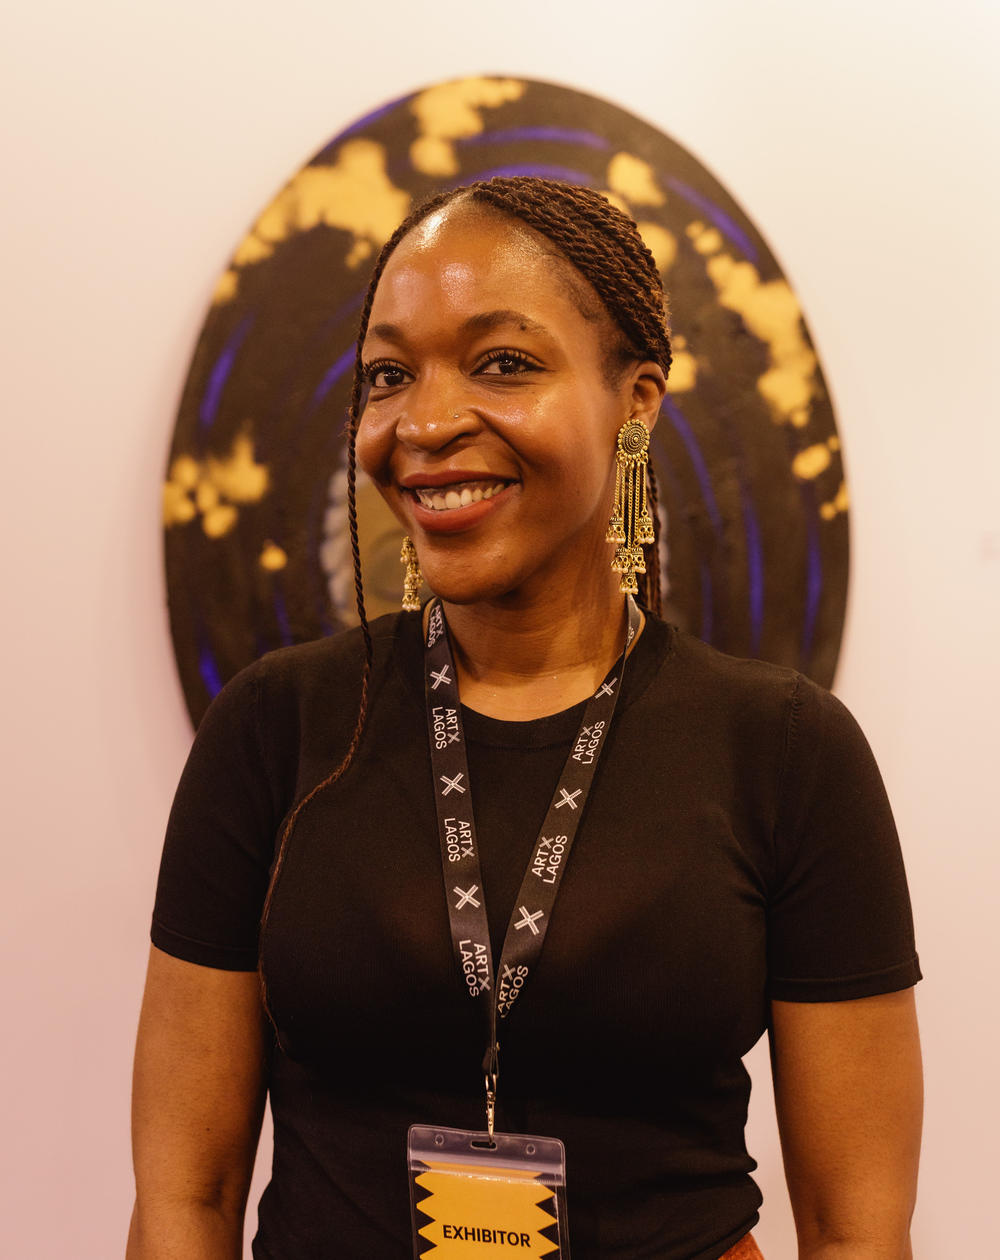 Wunika Mukan at Art X. She founded her self-named gallery in Lagos three years ago and has quickly gained wide regard within the industry. She said a reckoning within the art world after the killing of George Floyd drove efforts to exhibit a greater diversity of artists and a greater representation of Black art.